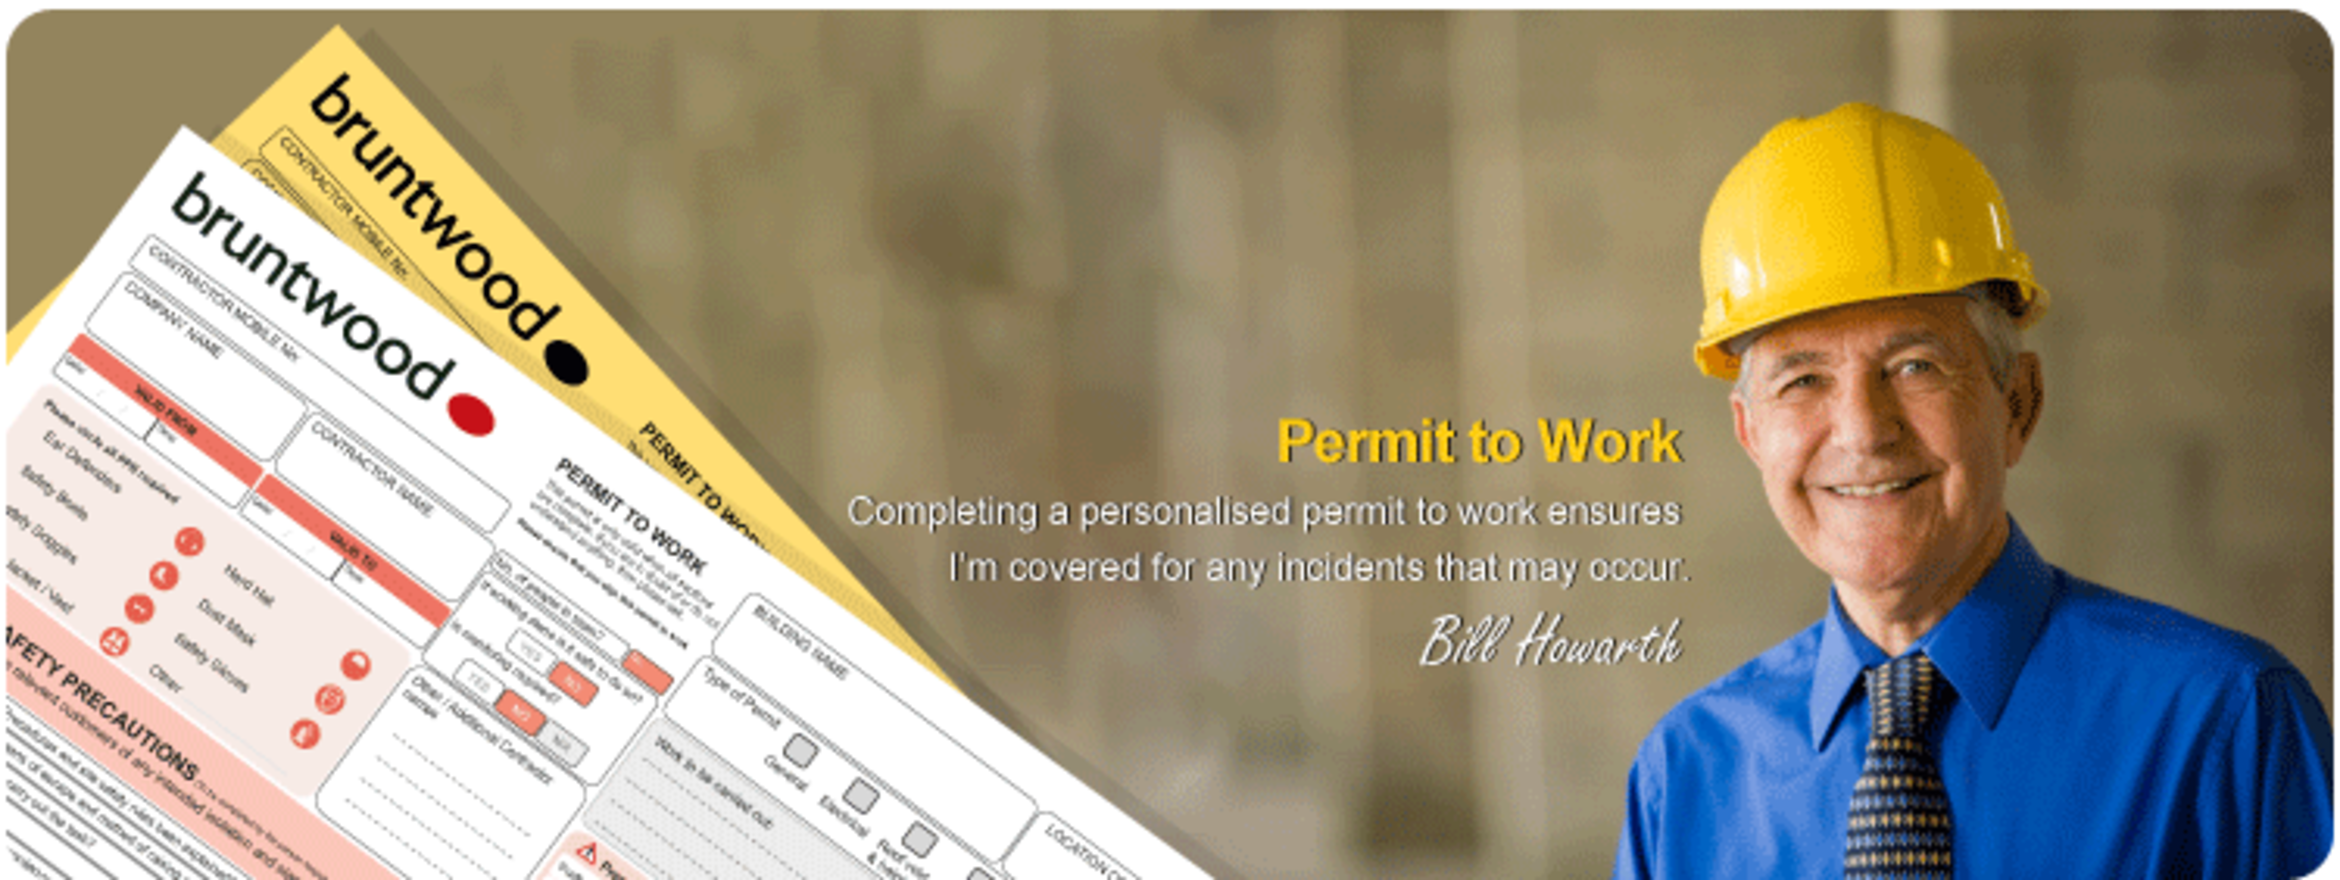 Contractor Permit to Work